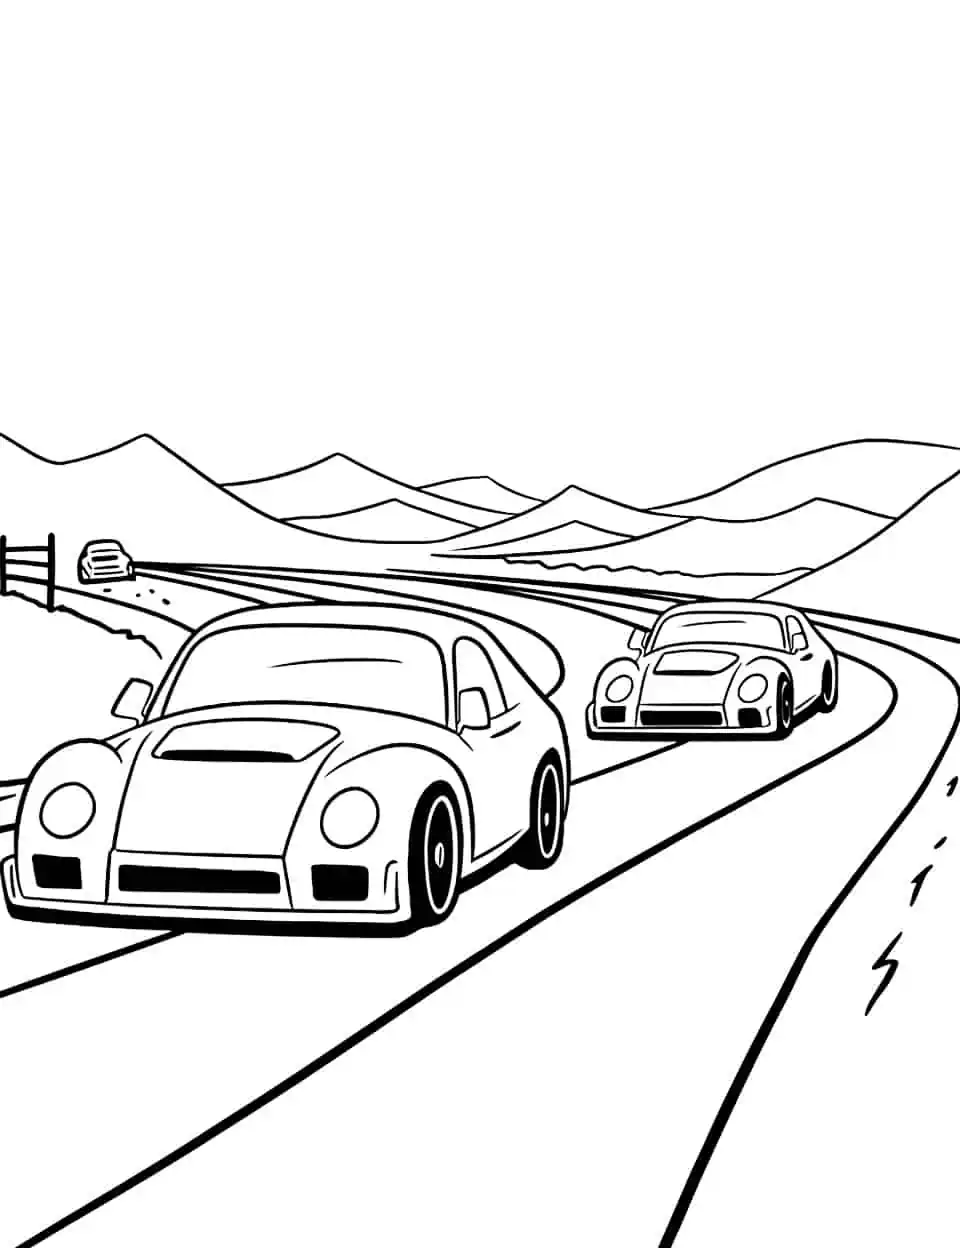 Racing to the Finish Line Car Coloring Page - A group of race cars approaching the finish line.